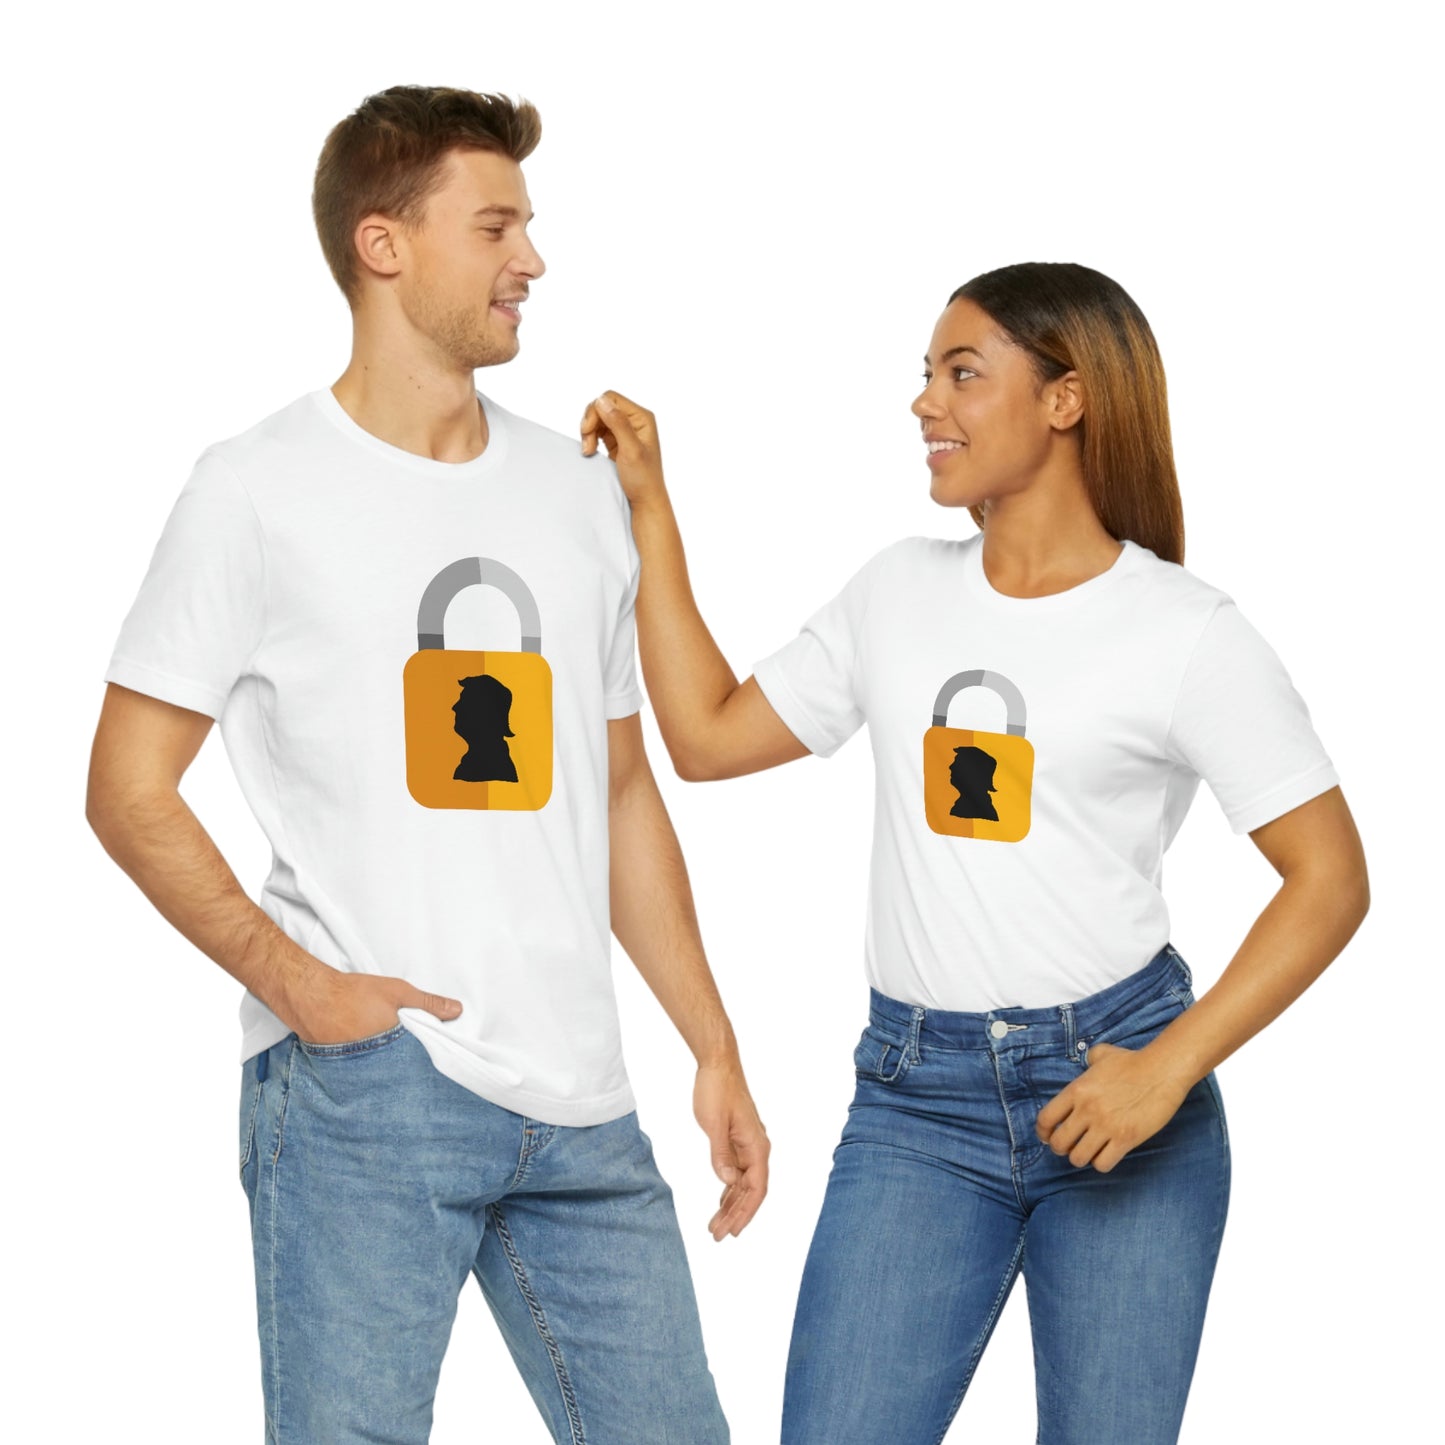 Lock Him Up T-Shirt with Gold Lock | EDGY T-Shirt Company | Funny Trump Unisex Jersey Short Sleeve Tee